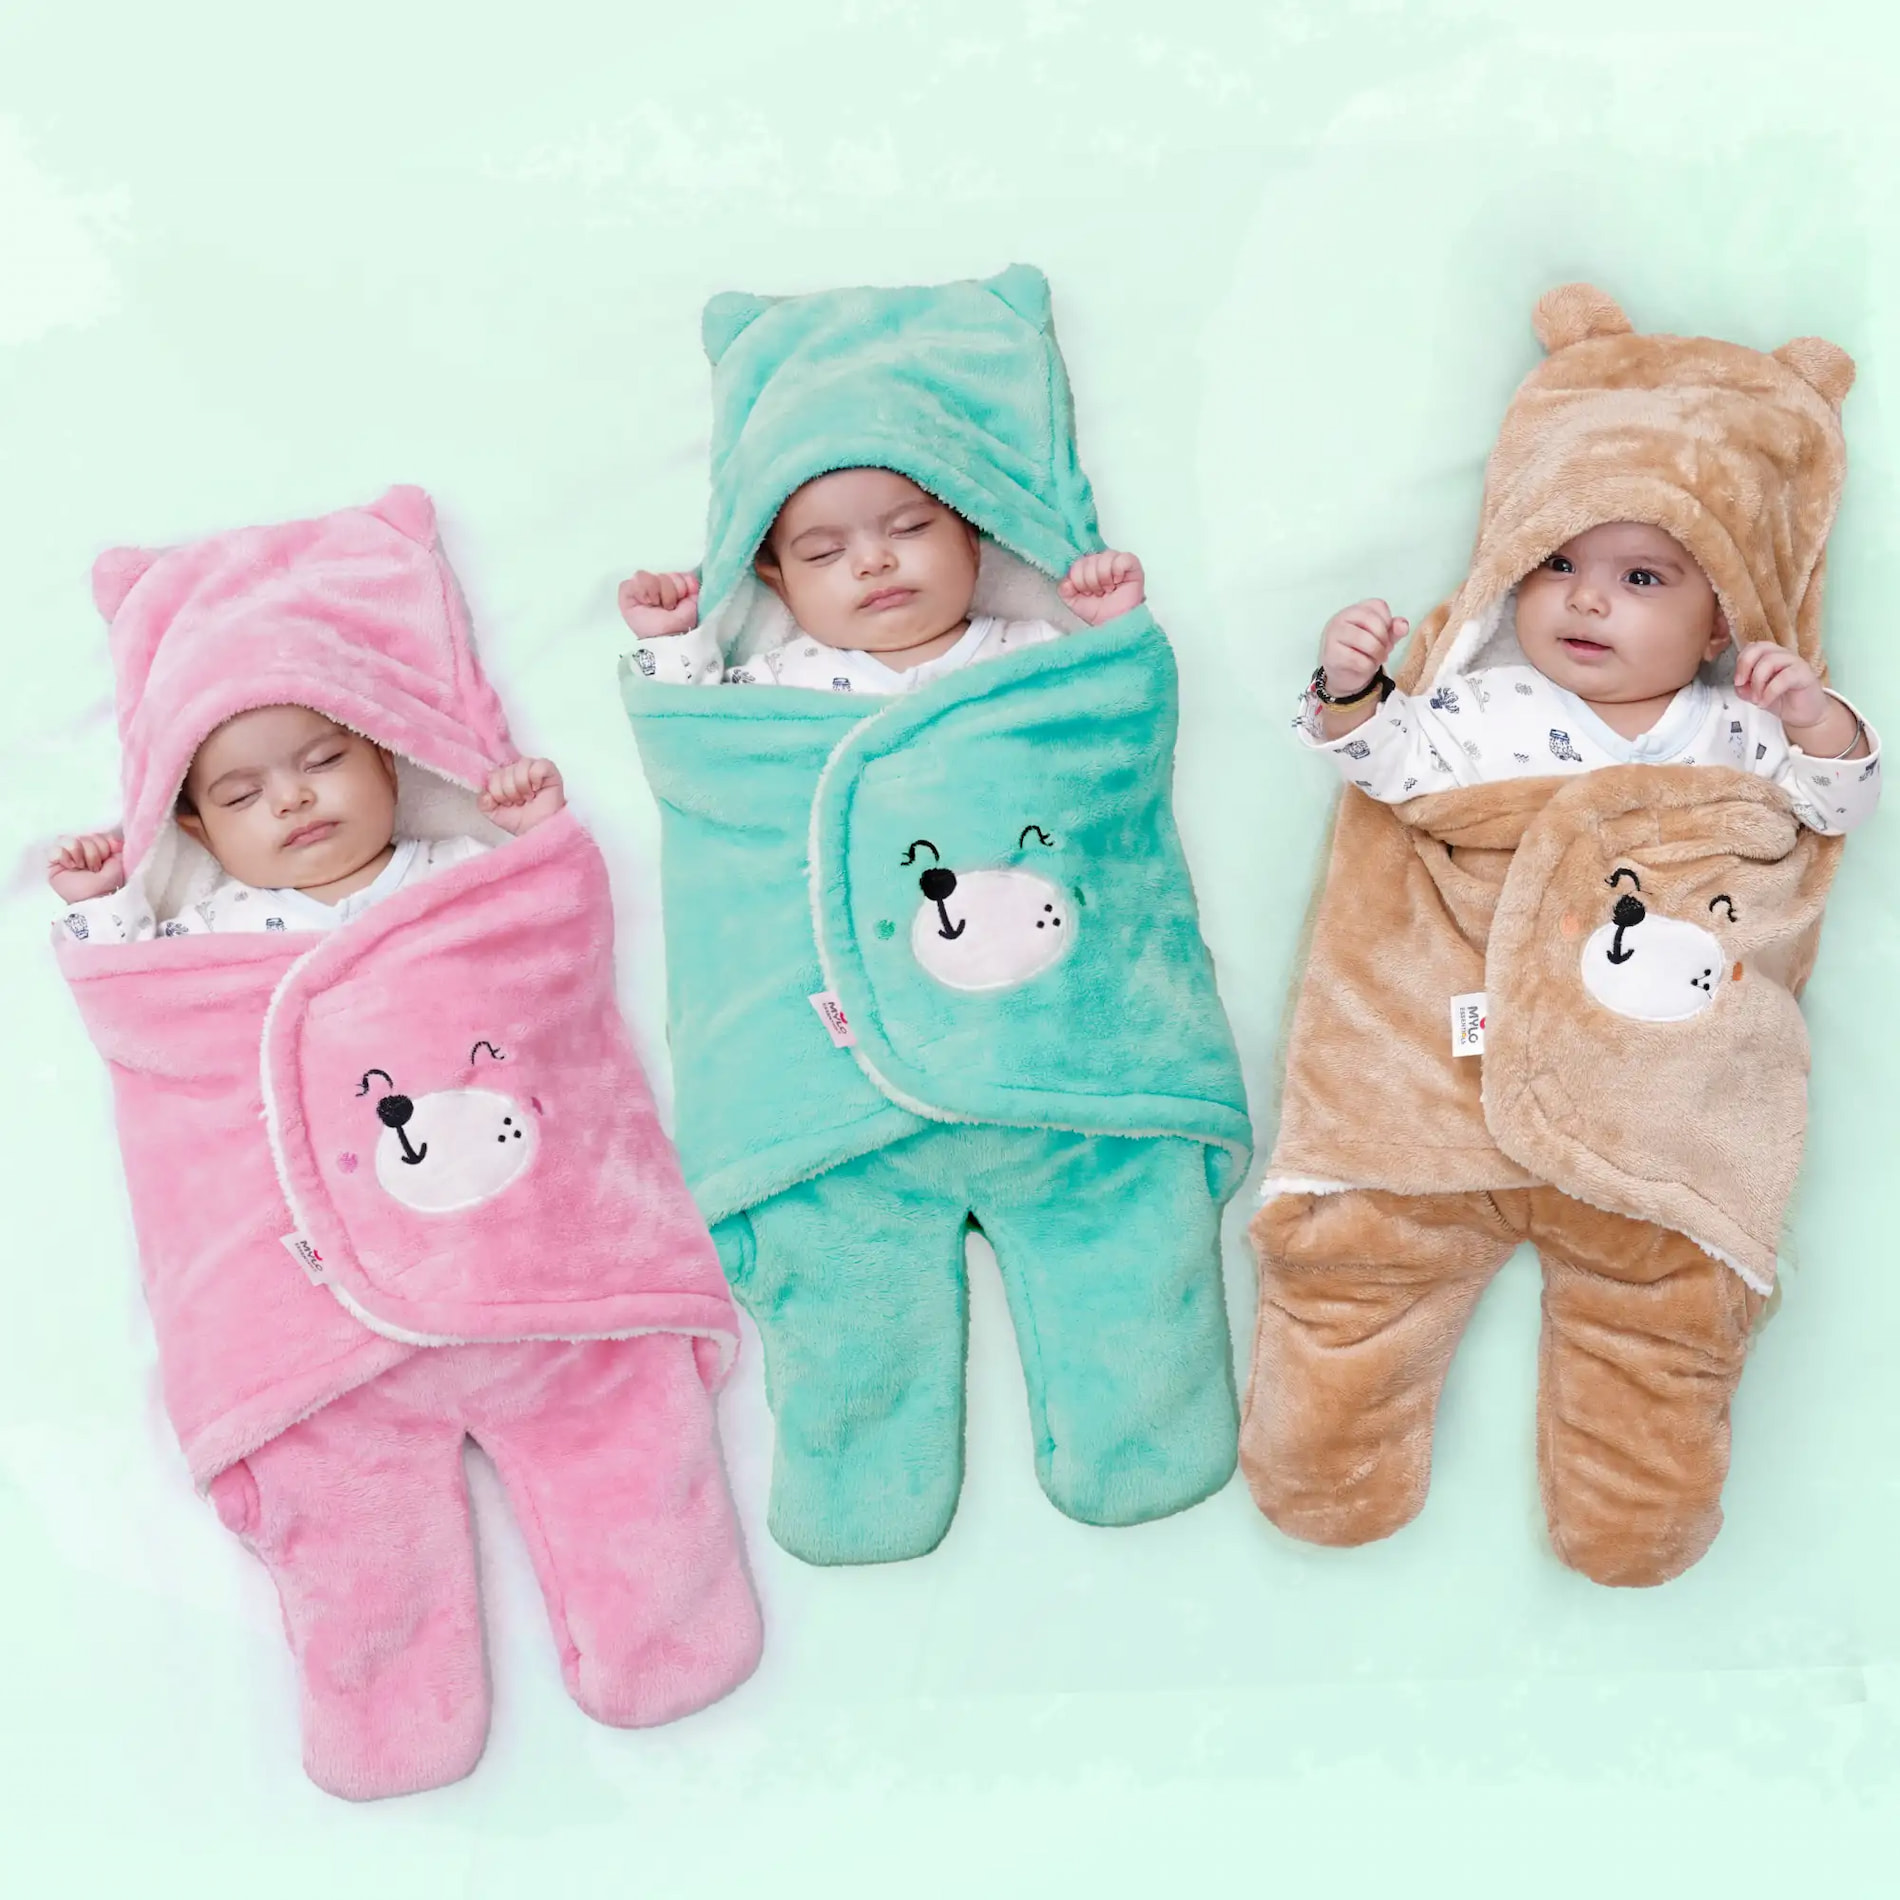 Baby Wrapper for New Born | Baby Swaddling Wrapper | 4-in-1 All Season AC Blanket cum Sleeping Bag for Baby 0-6 Months - Light Pink, Light Brown & Mint Green